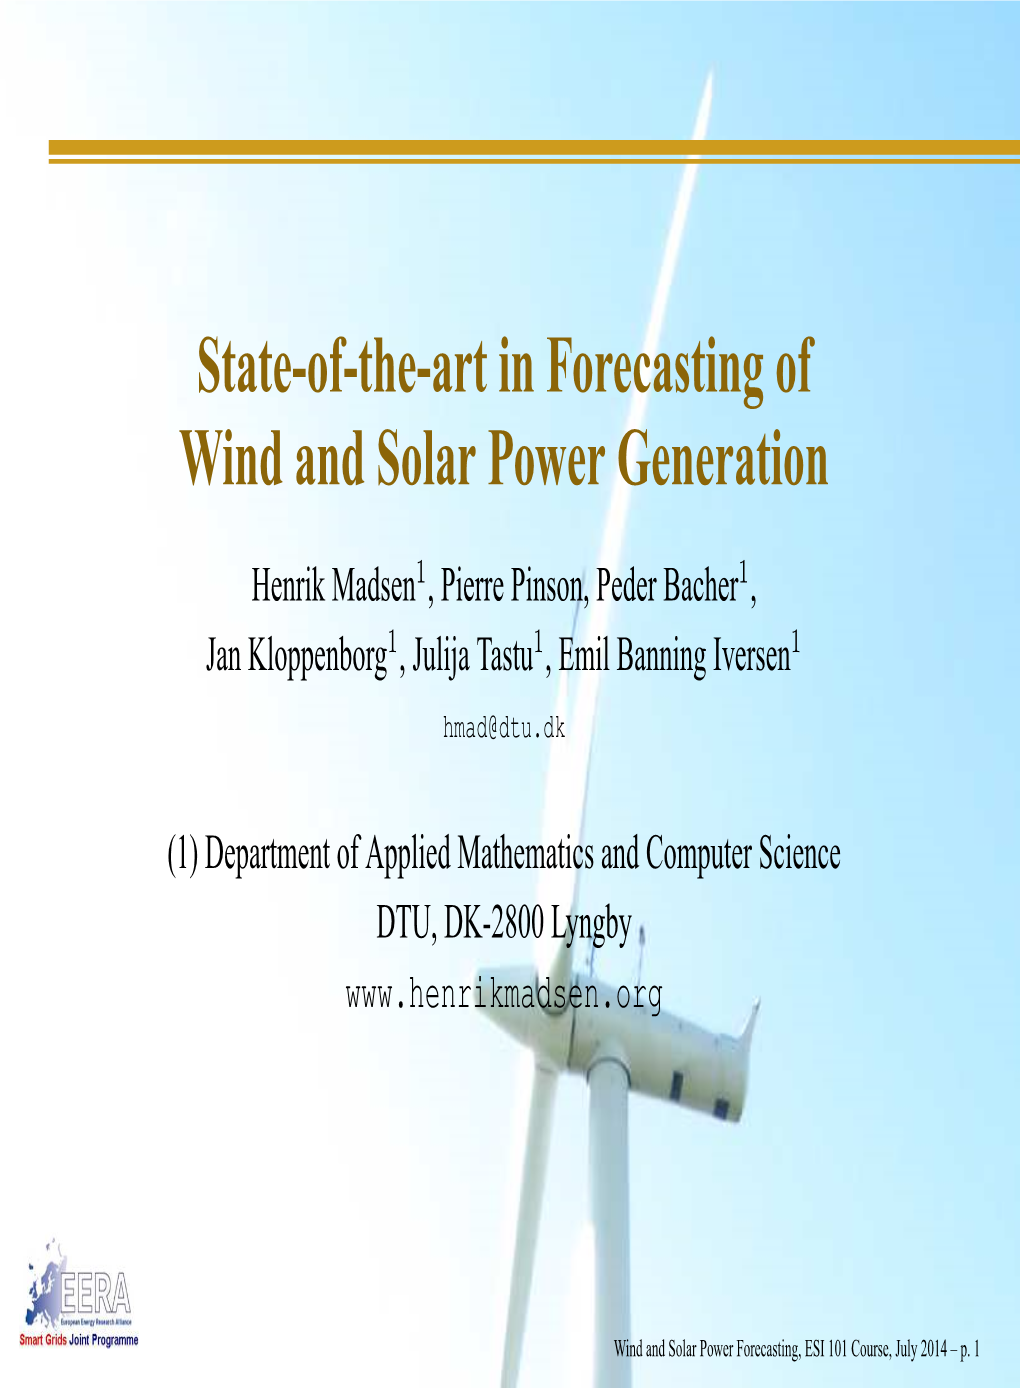 State of the Art in Forecasting of Wind and Solar Power Generation